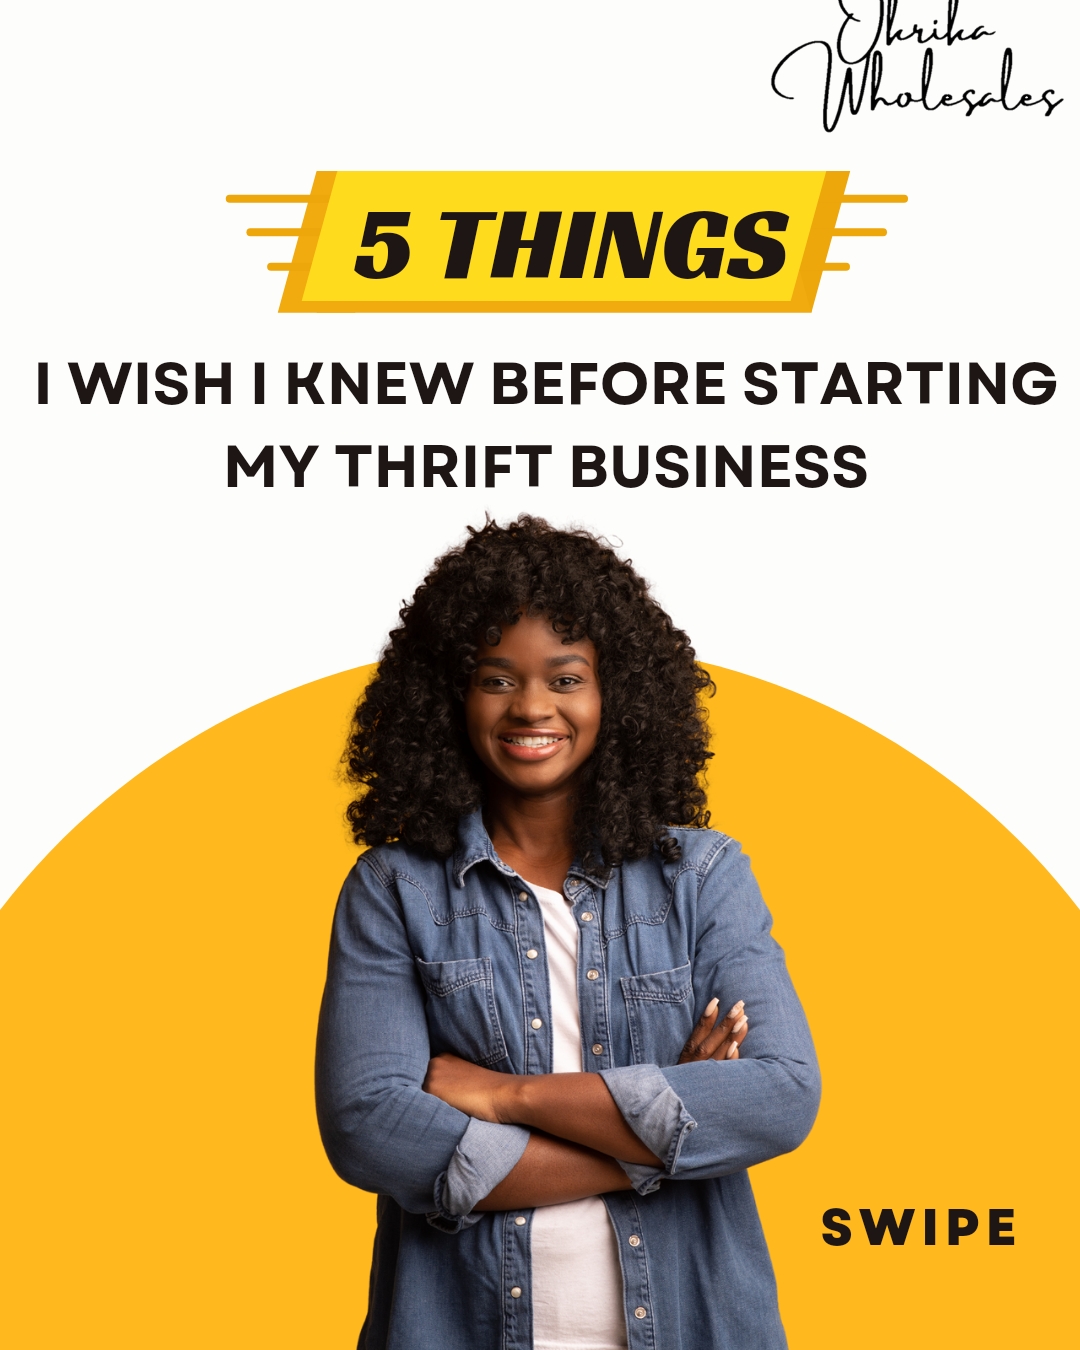 5 things i wish i knew before starting my Thrift business